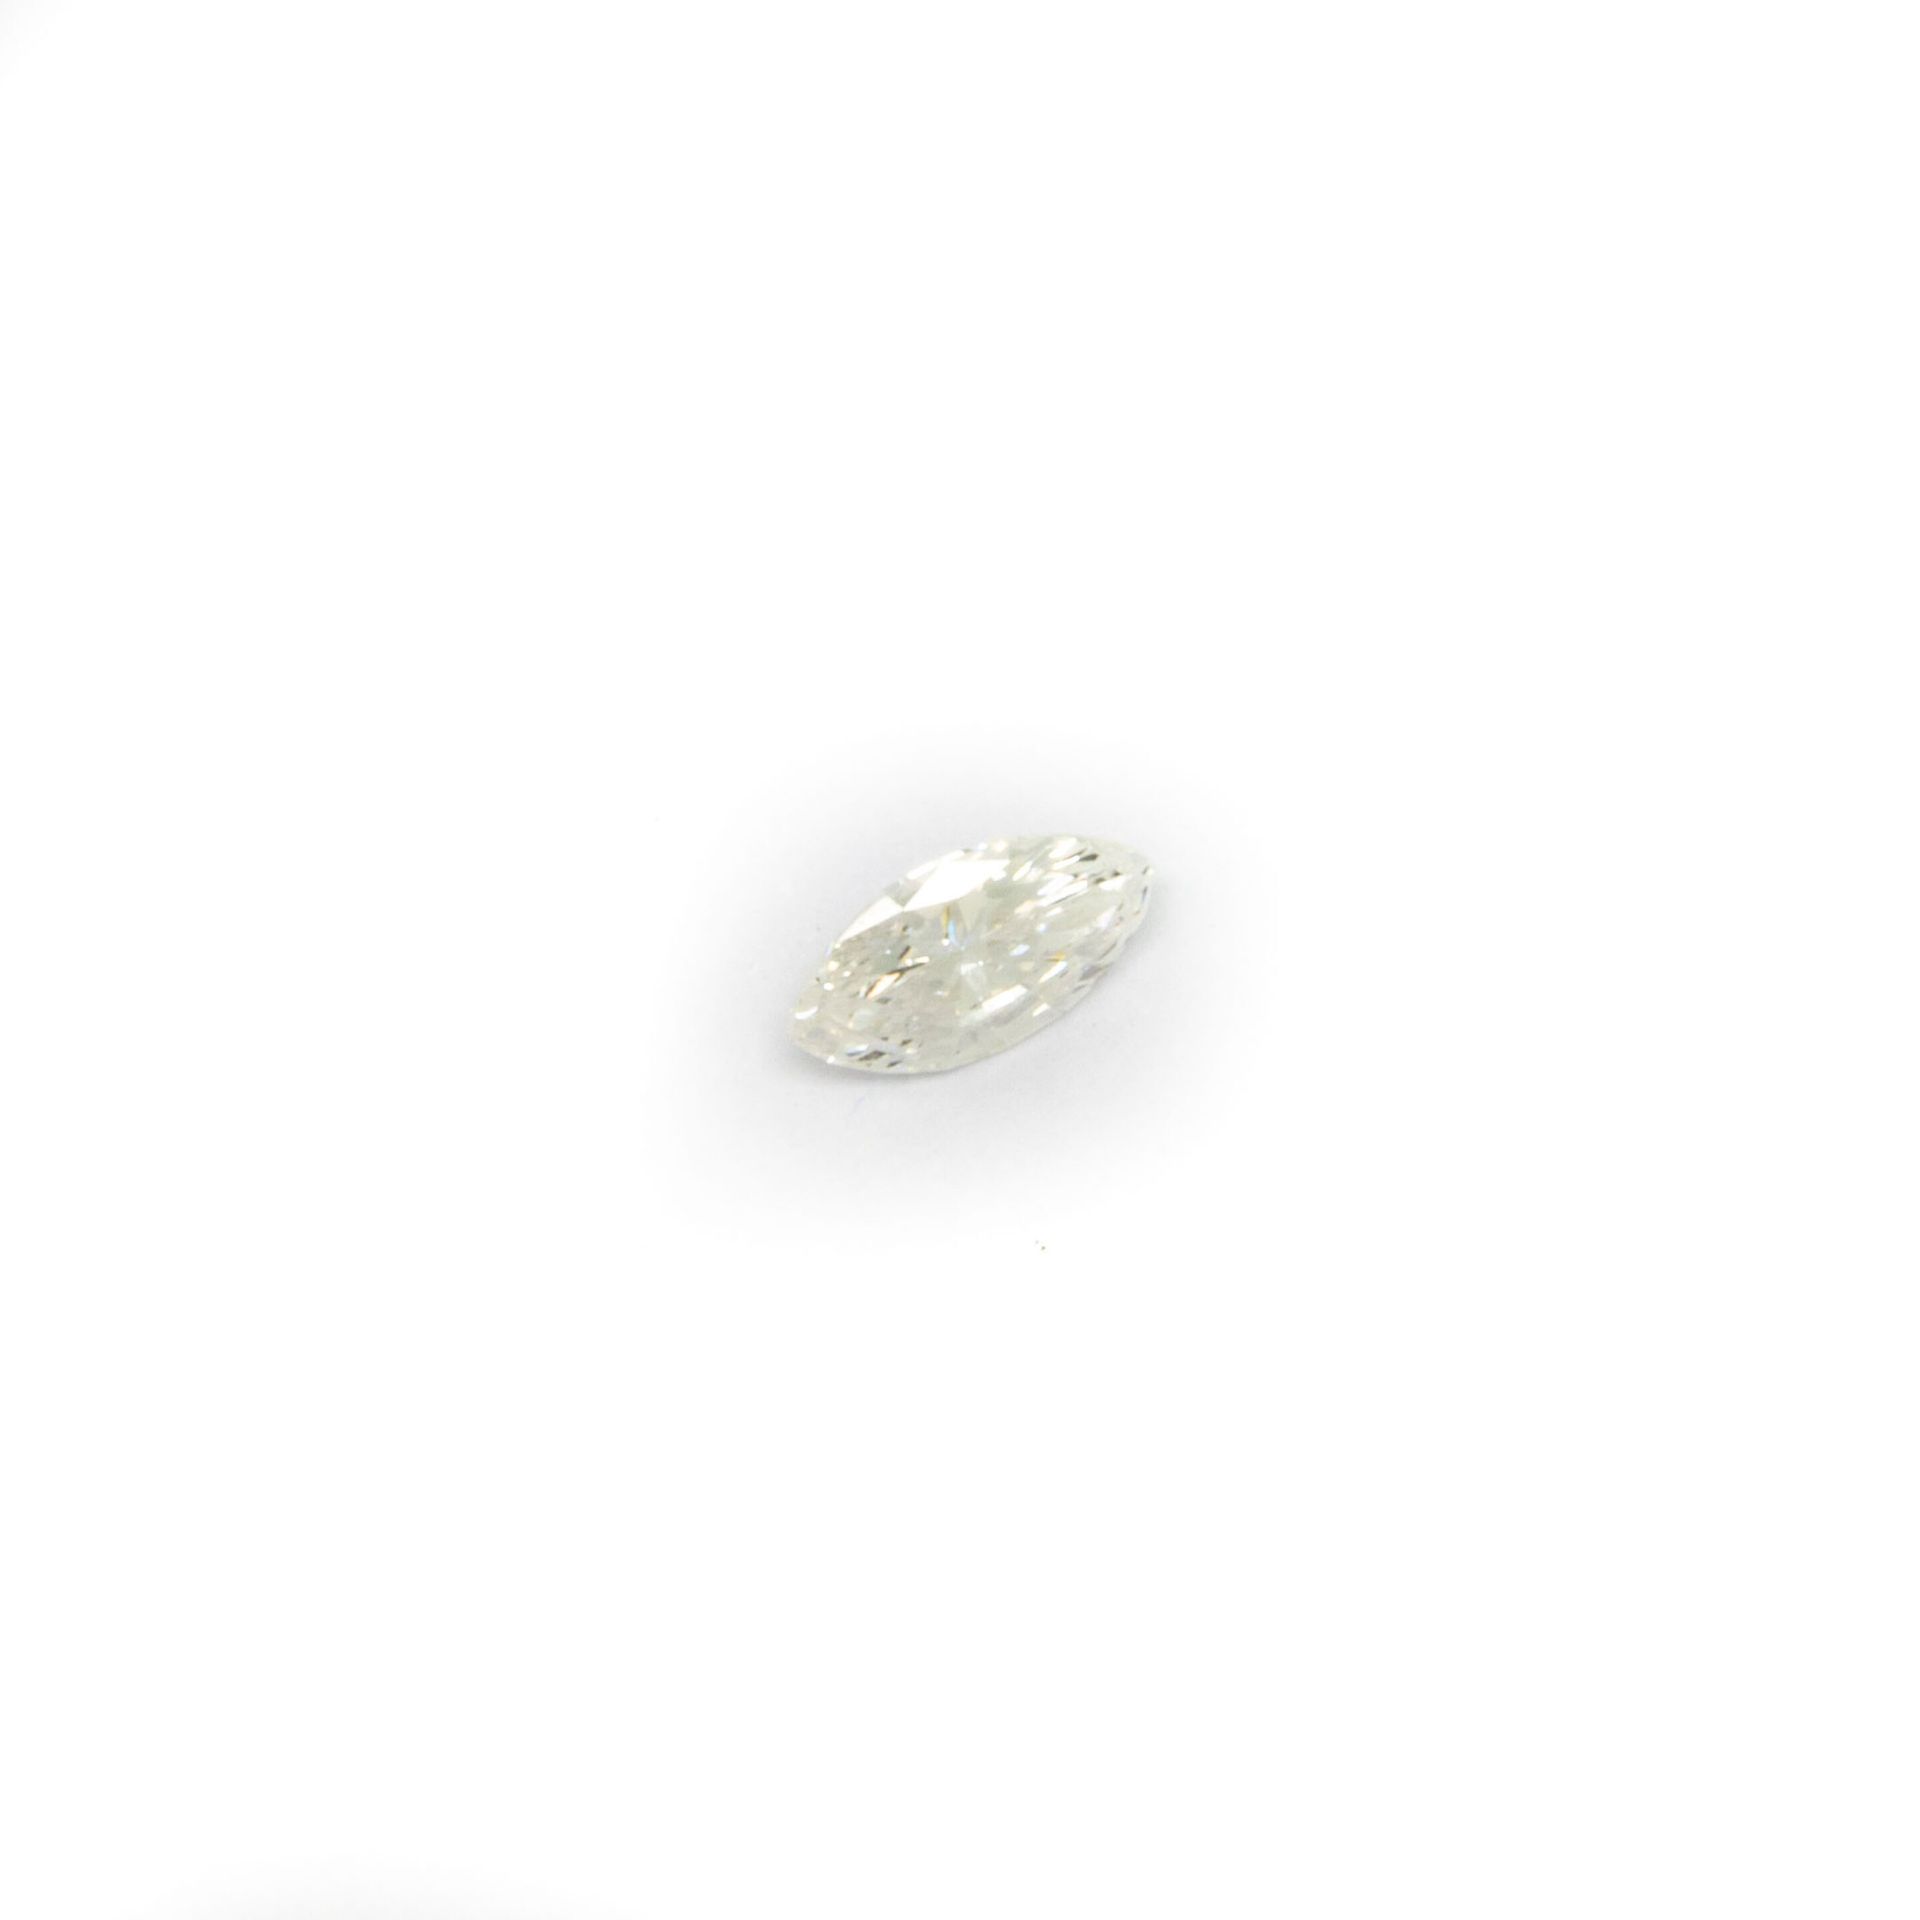 Null Shuttle diamond on paper, weighing 0.5 ct.